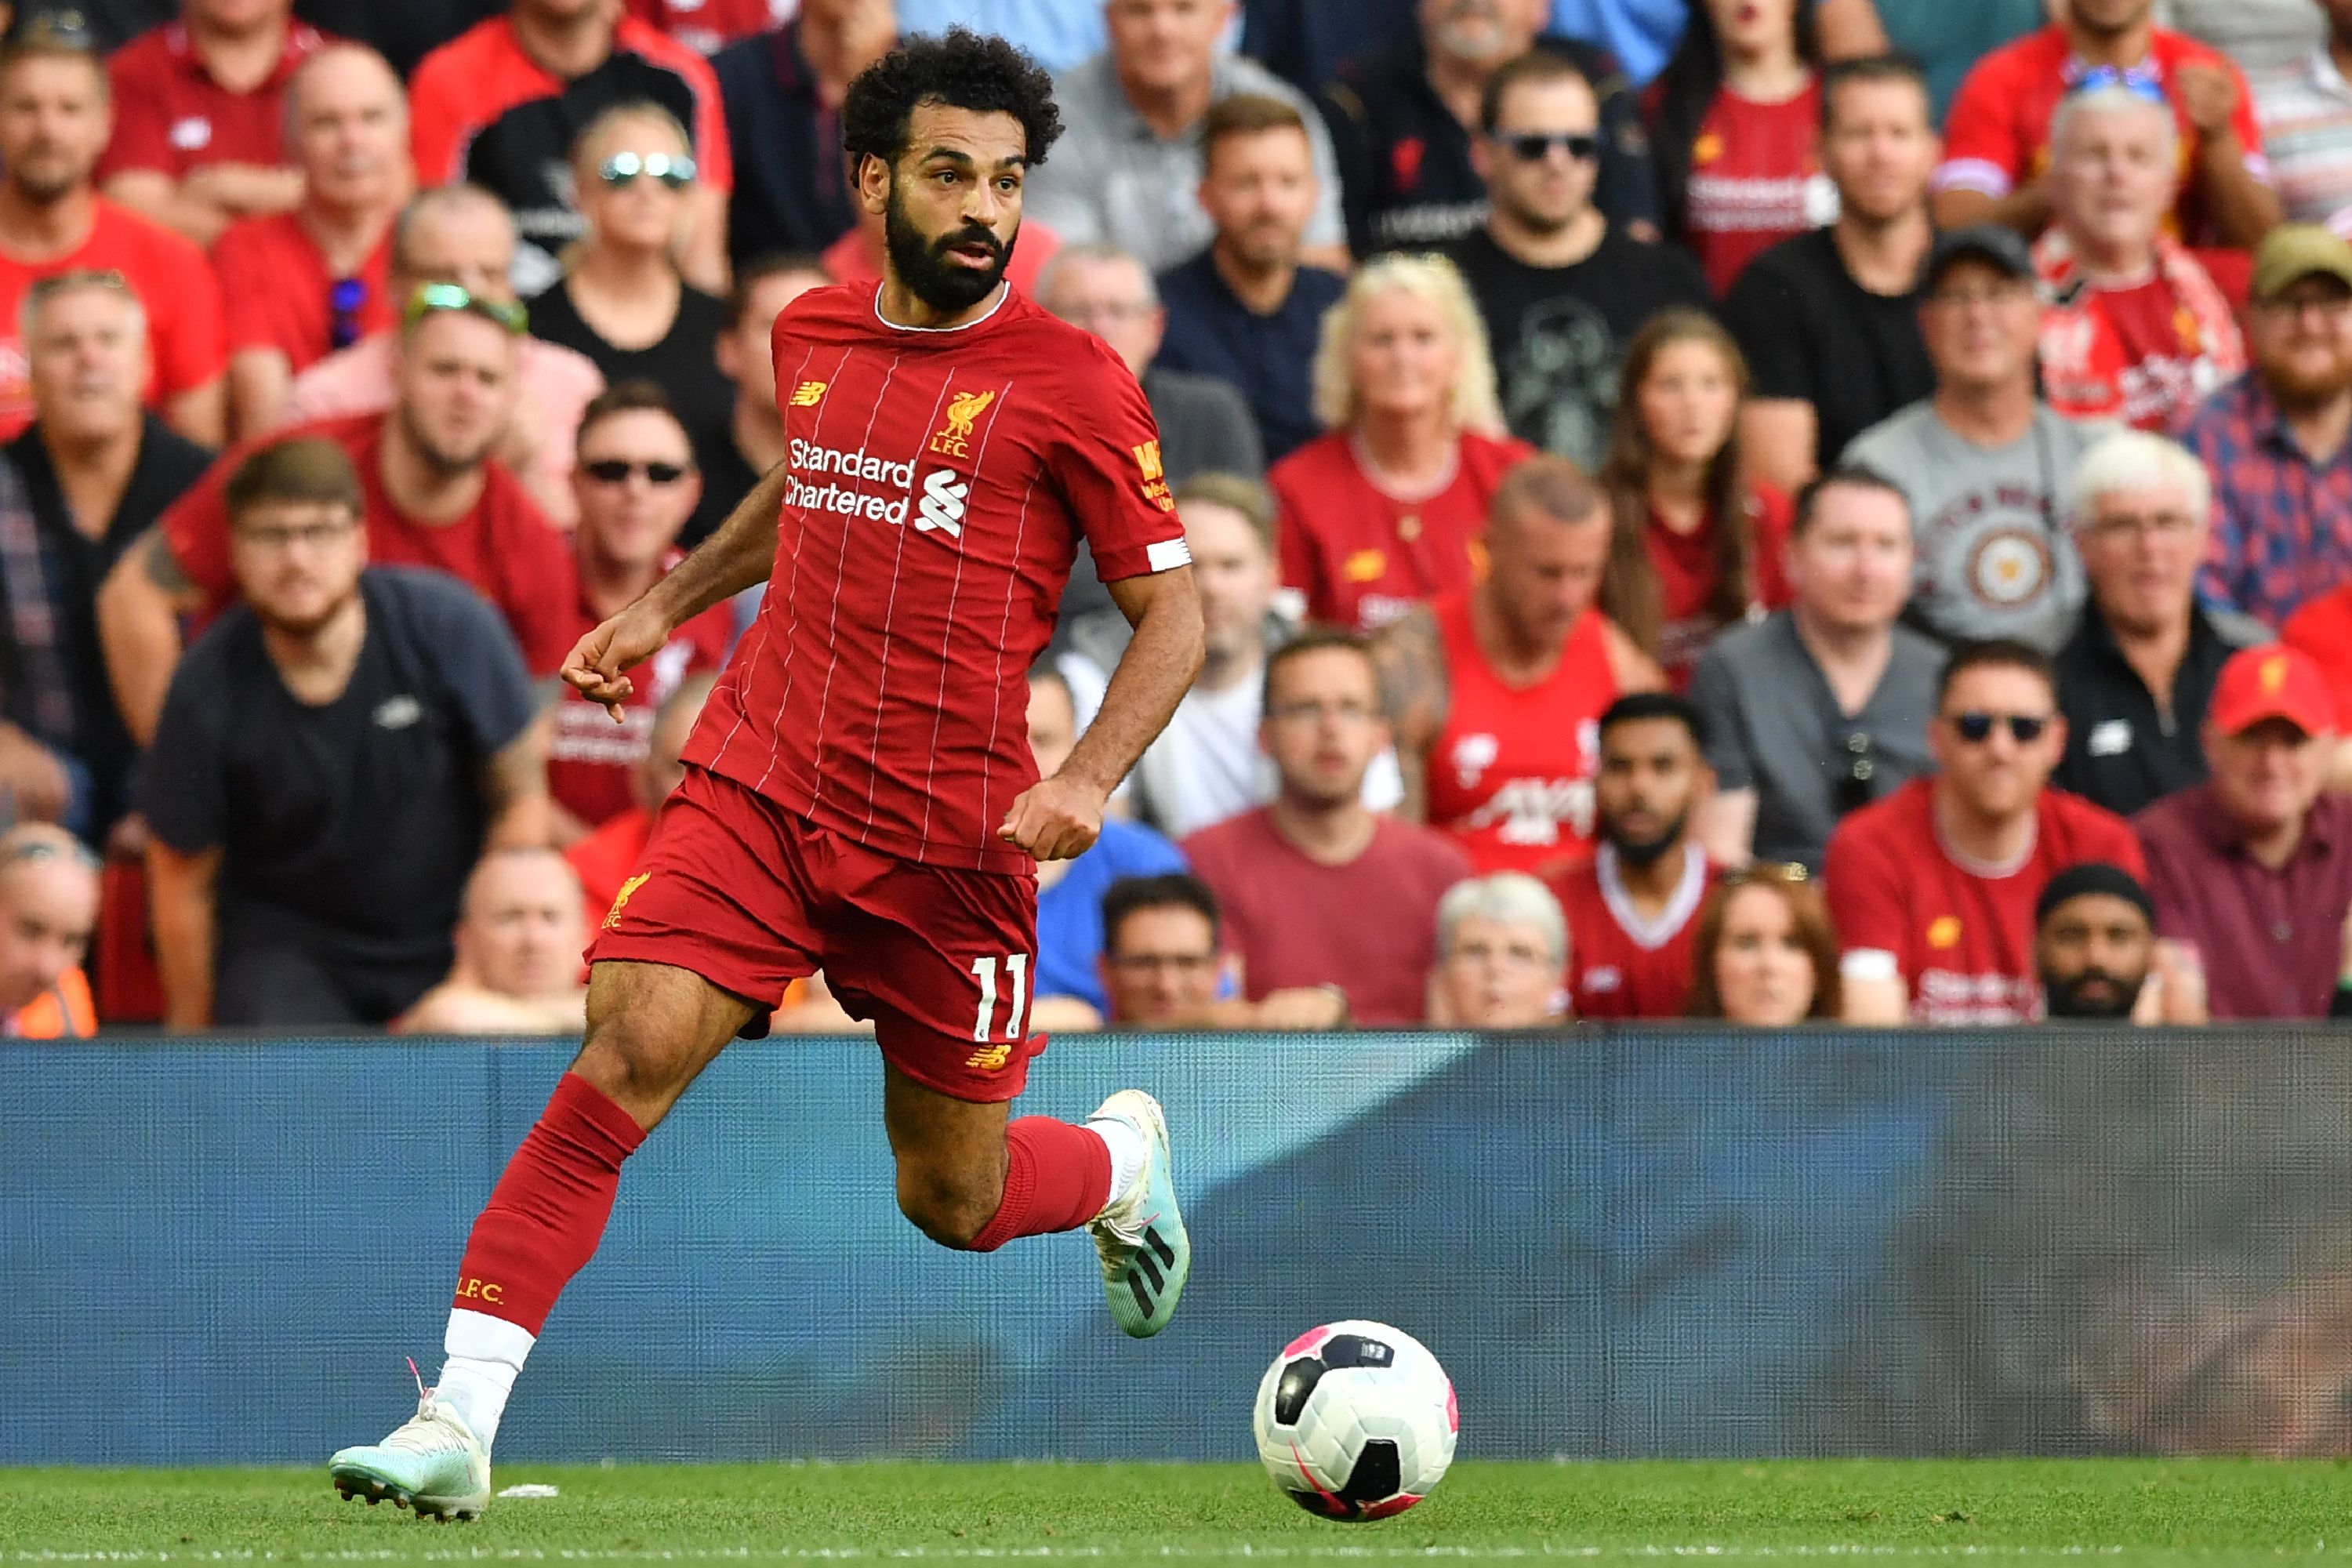 Liverpool's Egyptian midfielder Mohamed Salah runs with the ball during the English Premier League football match between Liverpool and Arsenal at Anfield in Liverpool, north west England on August 24, 2019. (Photo by Ben STANSALL / AFP) / RESTRICTED TO EDITORIAL USE. No use with unauthorized audio, video, data, fixture lists, club/league logos or 'live' services. Online in-match use limited to 120 images. An additional 40 images may be used in extra time. No video emulation. Social media in-match use limited to 120 images. An additional 40 images may be used in extra time. No use in betting publications, games or single club/league/player publications. /         (Photo credit should read BEN STANSALL/AFP/Getty Images)